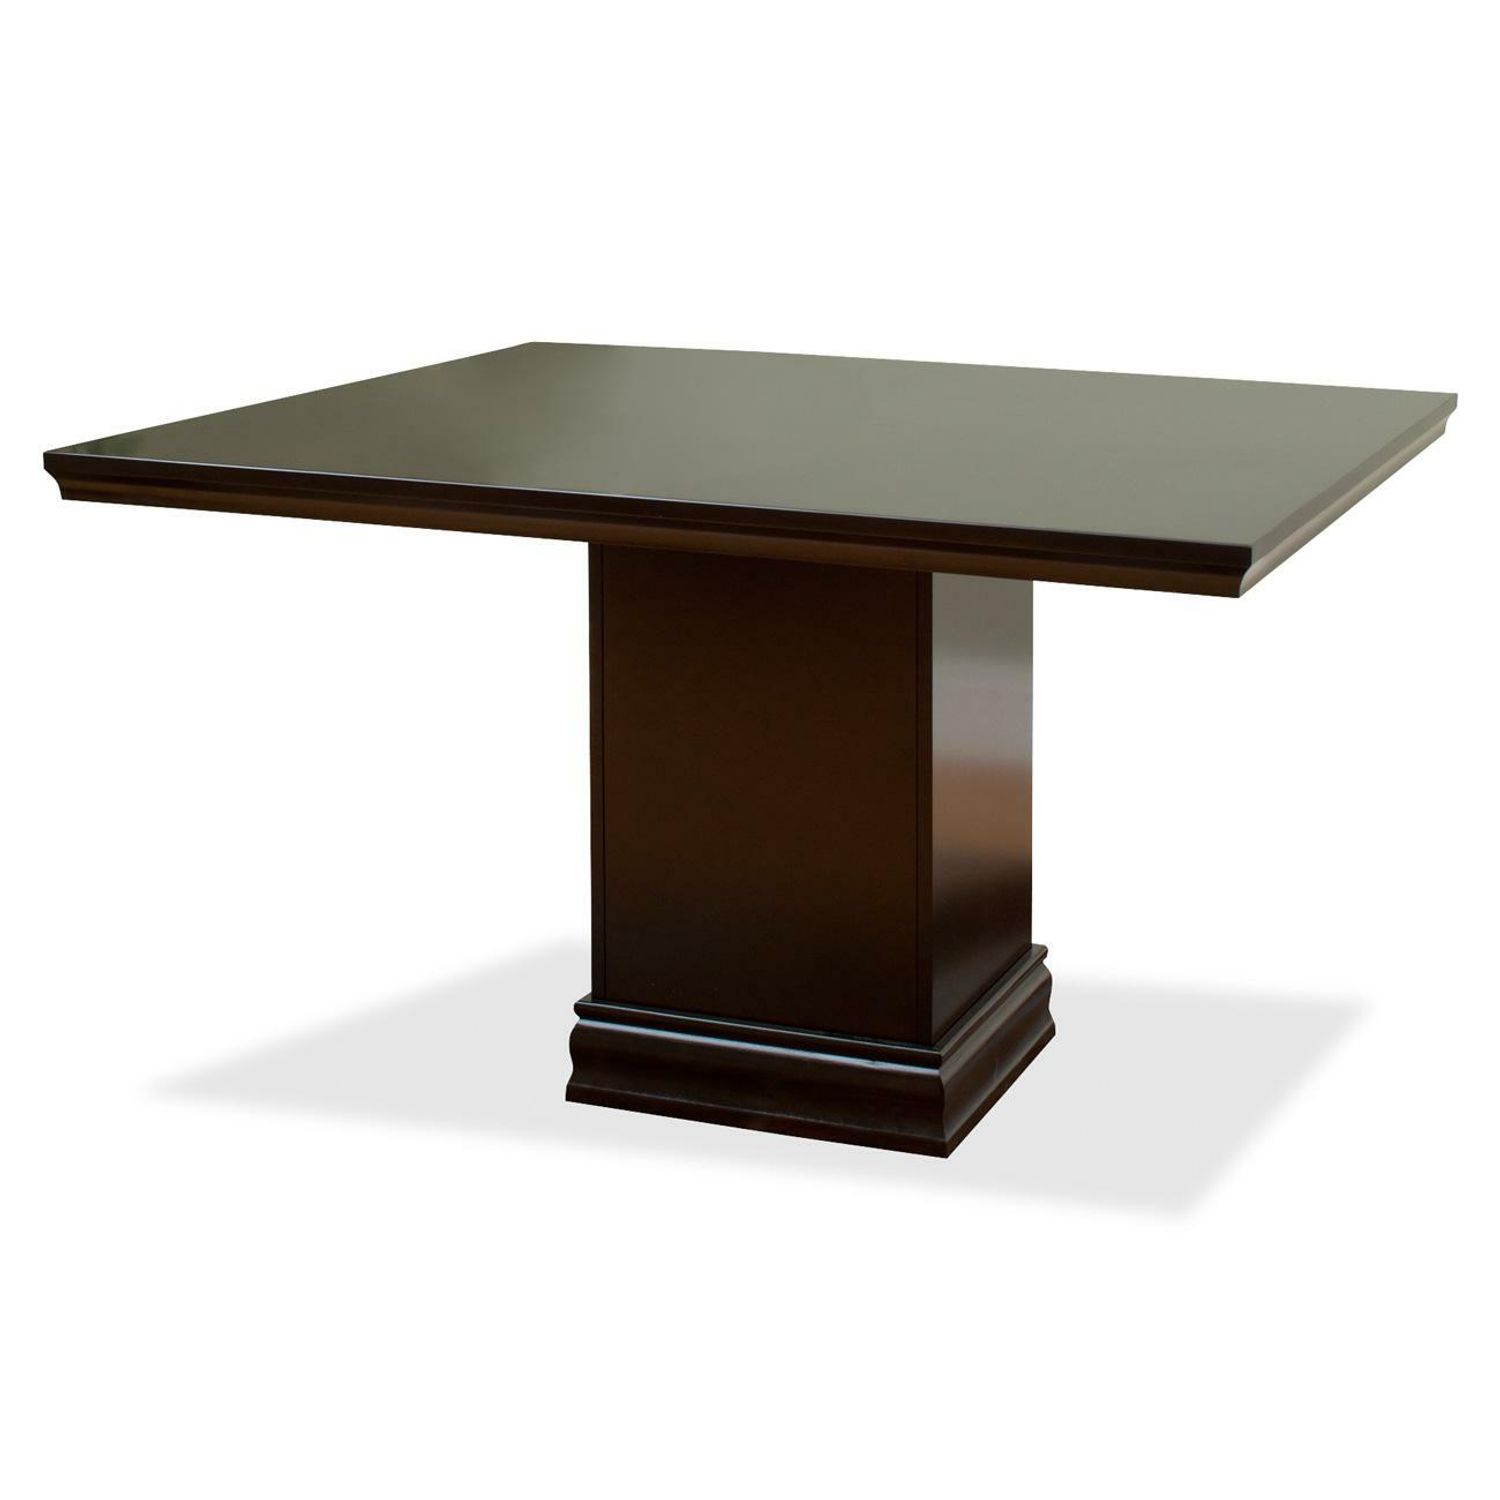 Fulton Expandable Conference Table 47.3" x 47.3" x 30", Material: Nickel Handle, Finish: Espresso